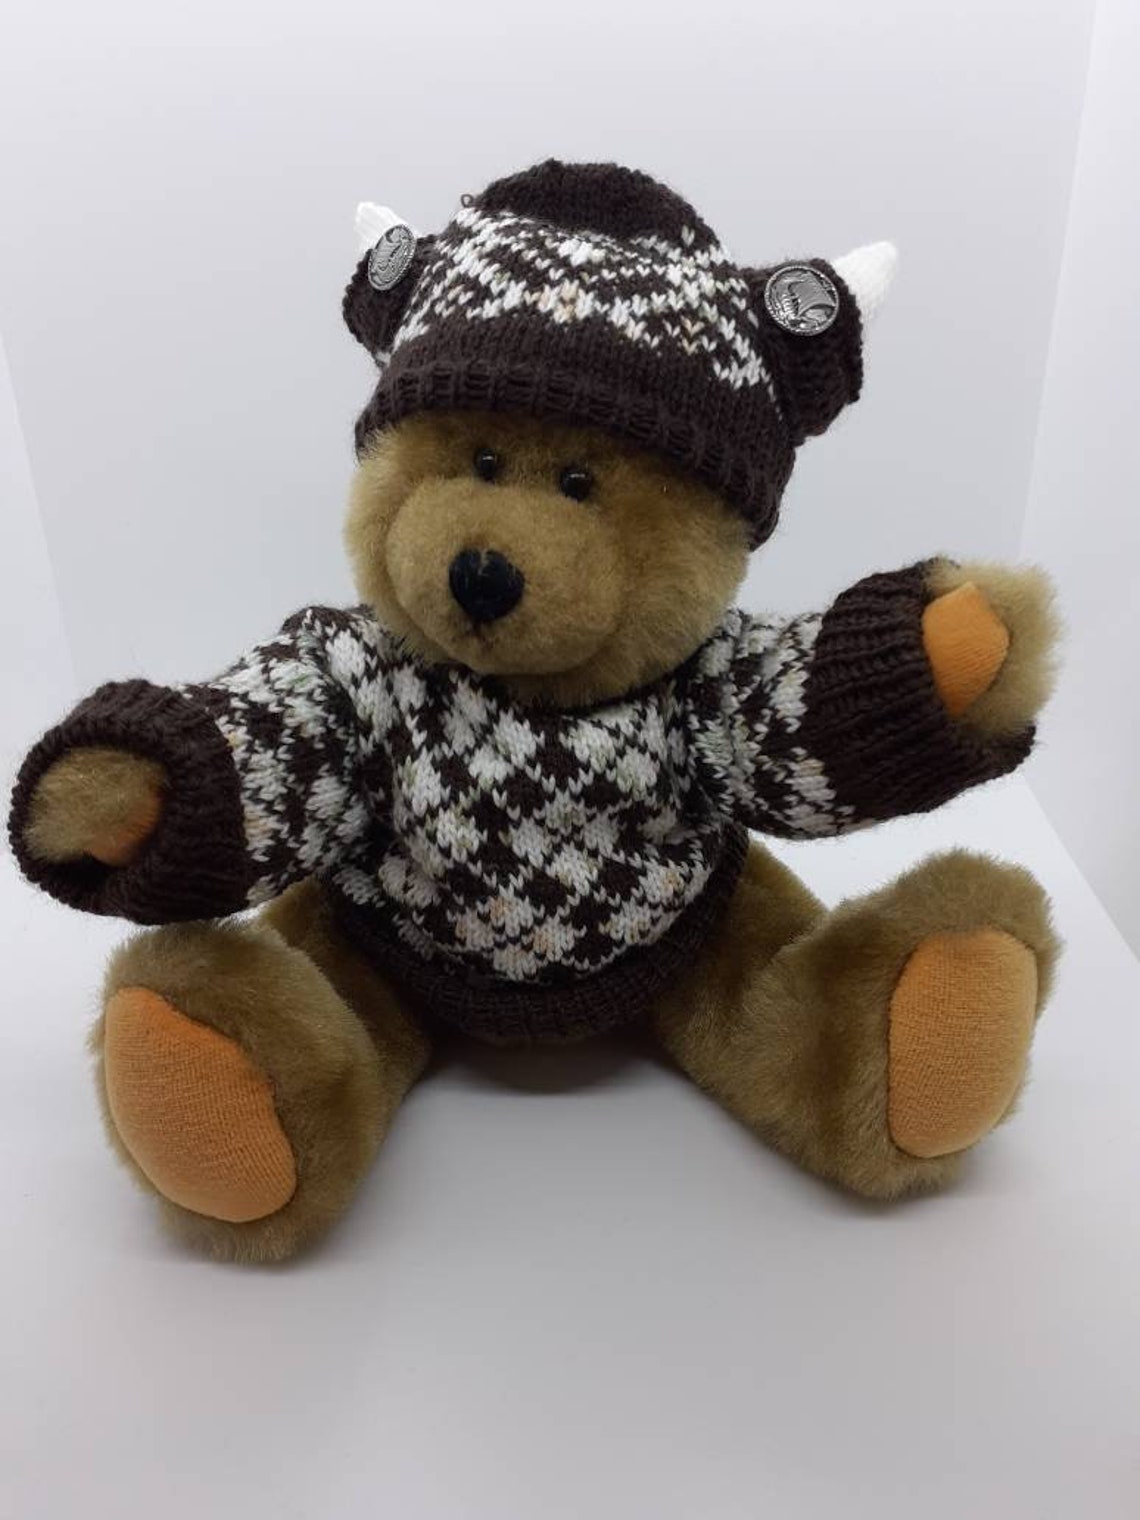 Teddy bear with traditional fair isle jumper and Viking style | Etsy